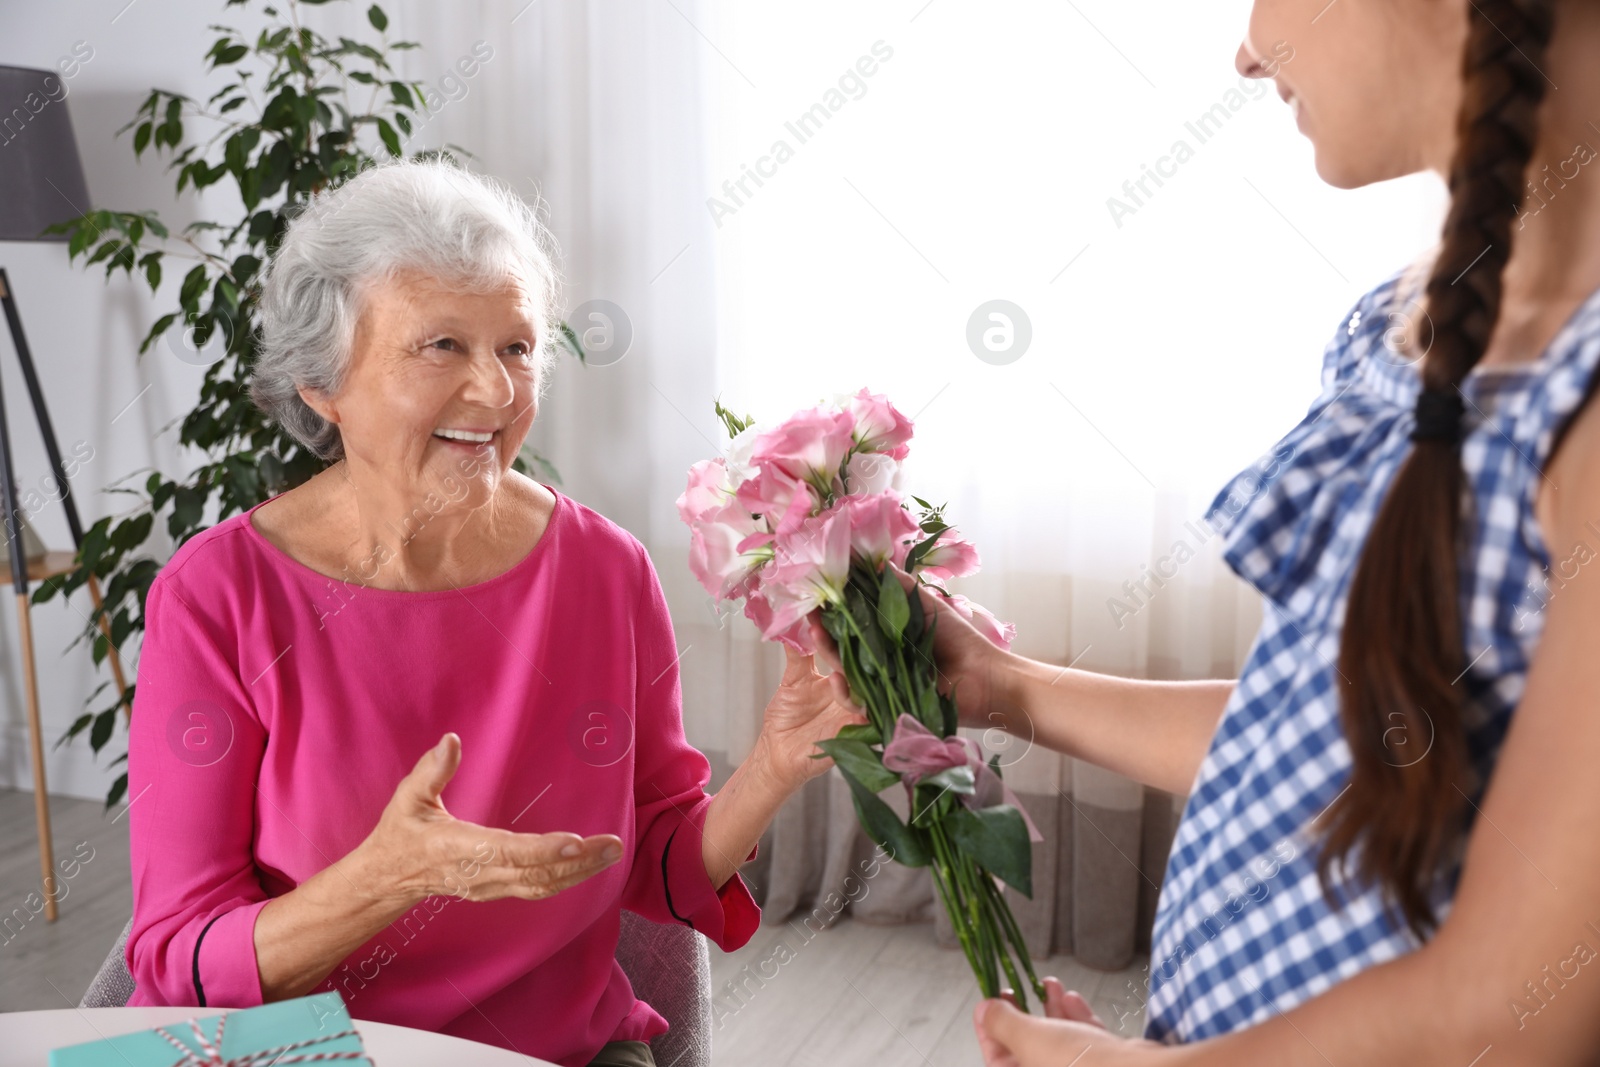 Photo of Preteen girl congratulating her granny at home. Happy Mother's Day